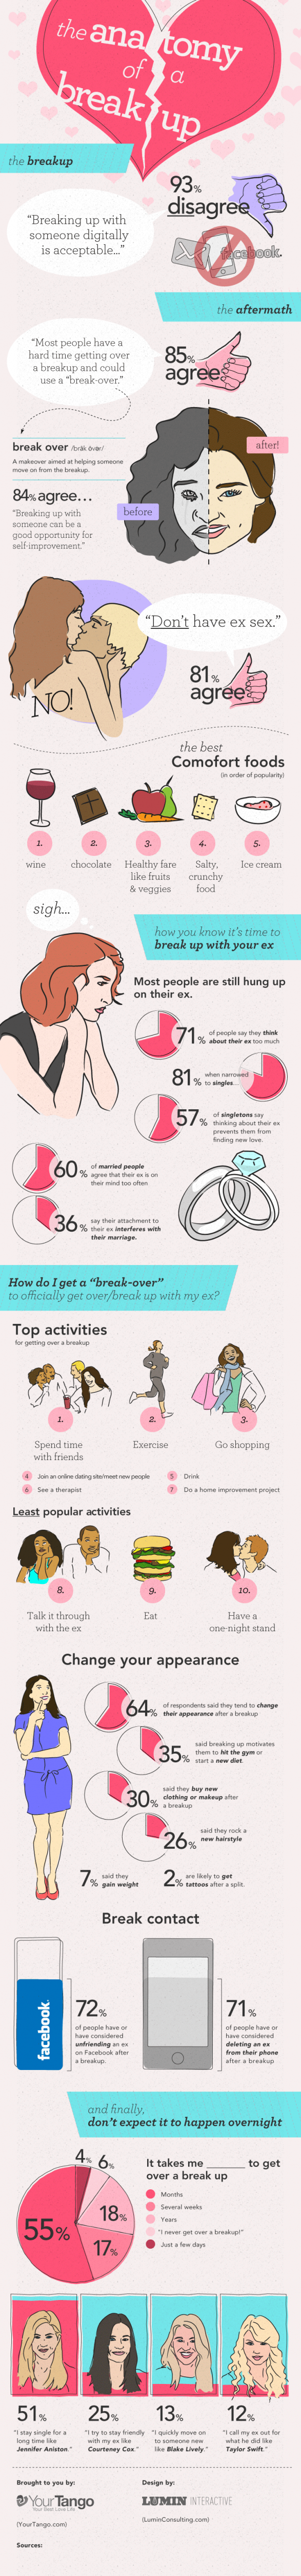 the-anatomy-of-a-breakup